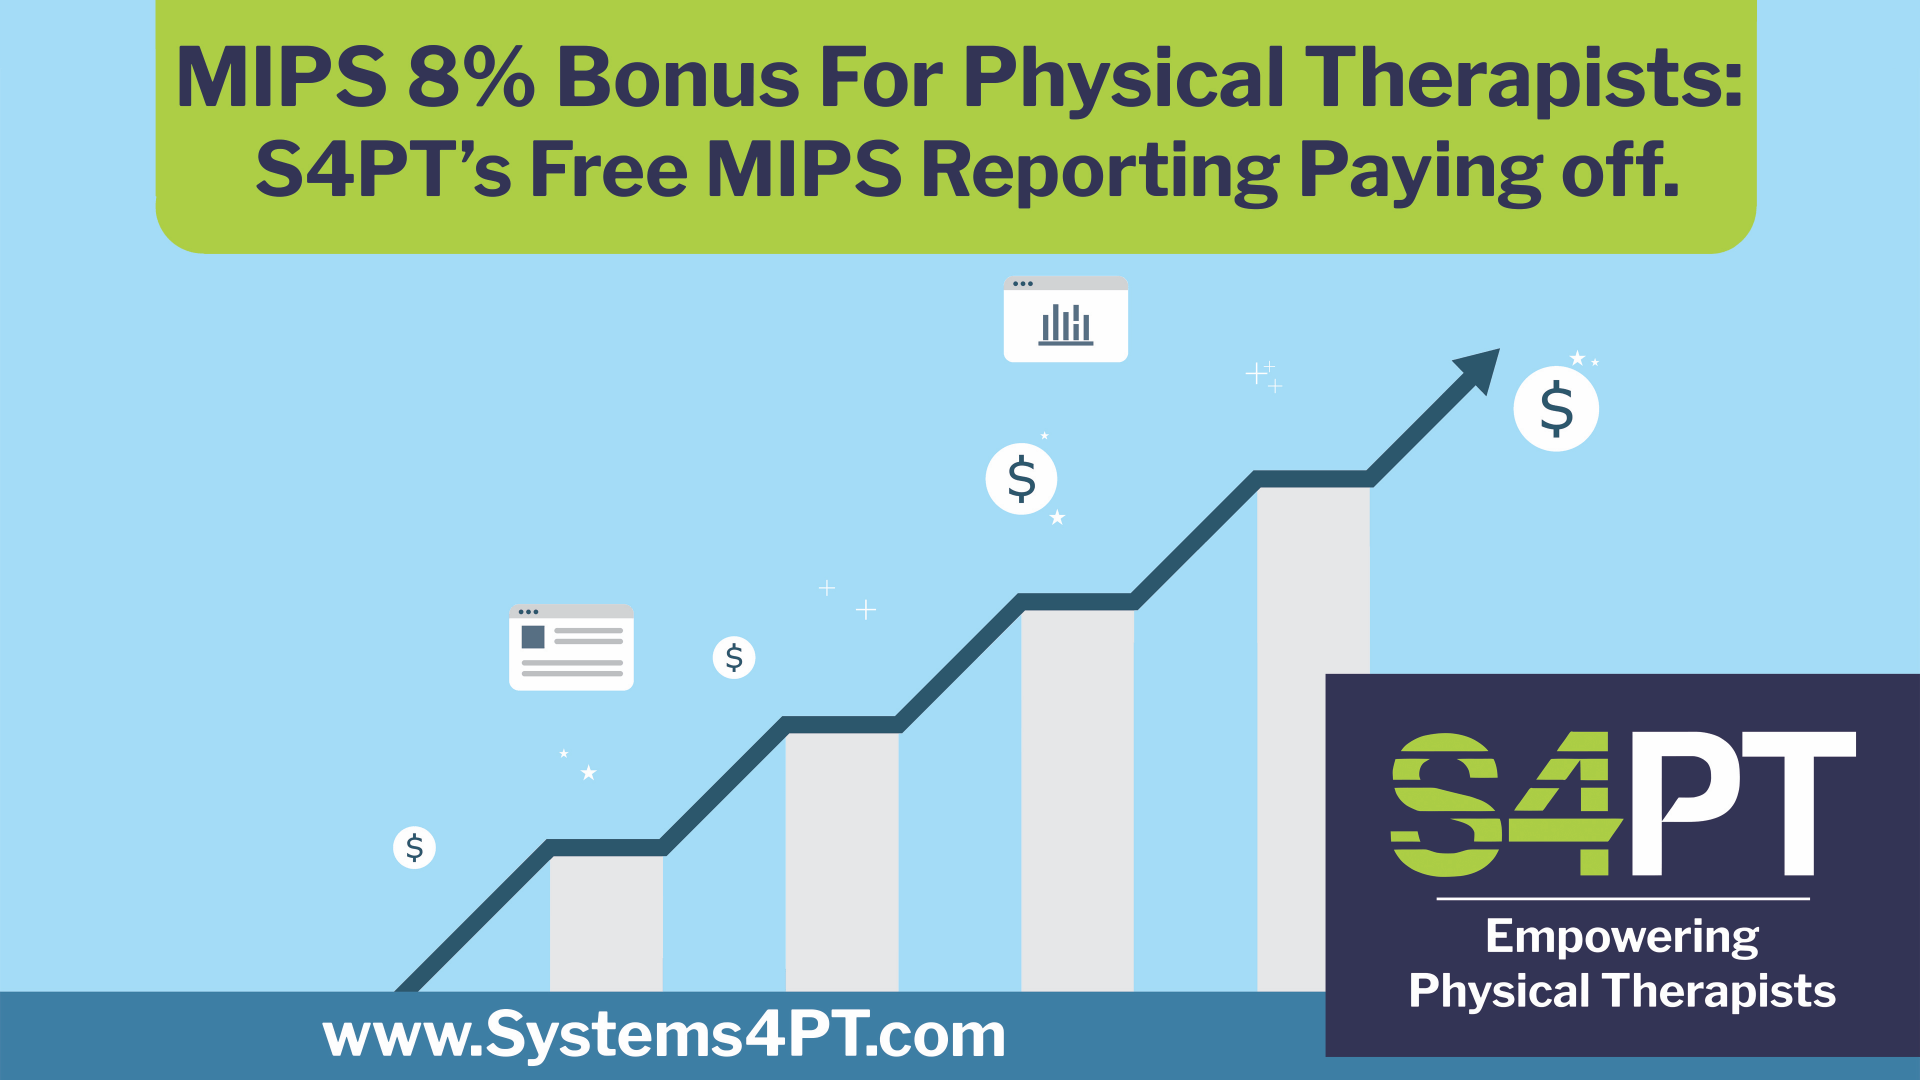 Free MIPS reporting paying off for S4PT clinics